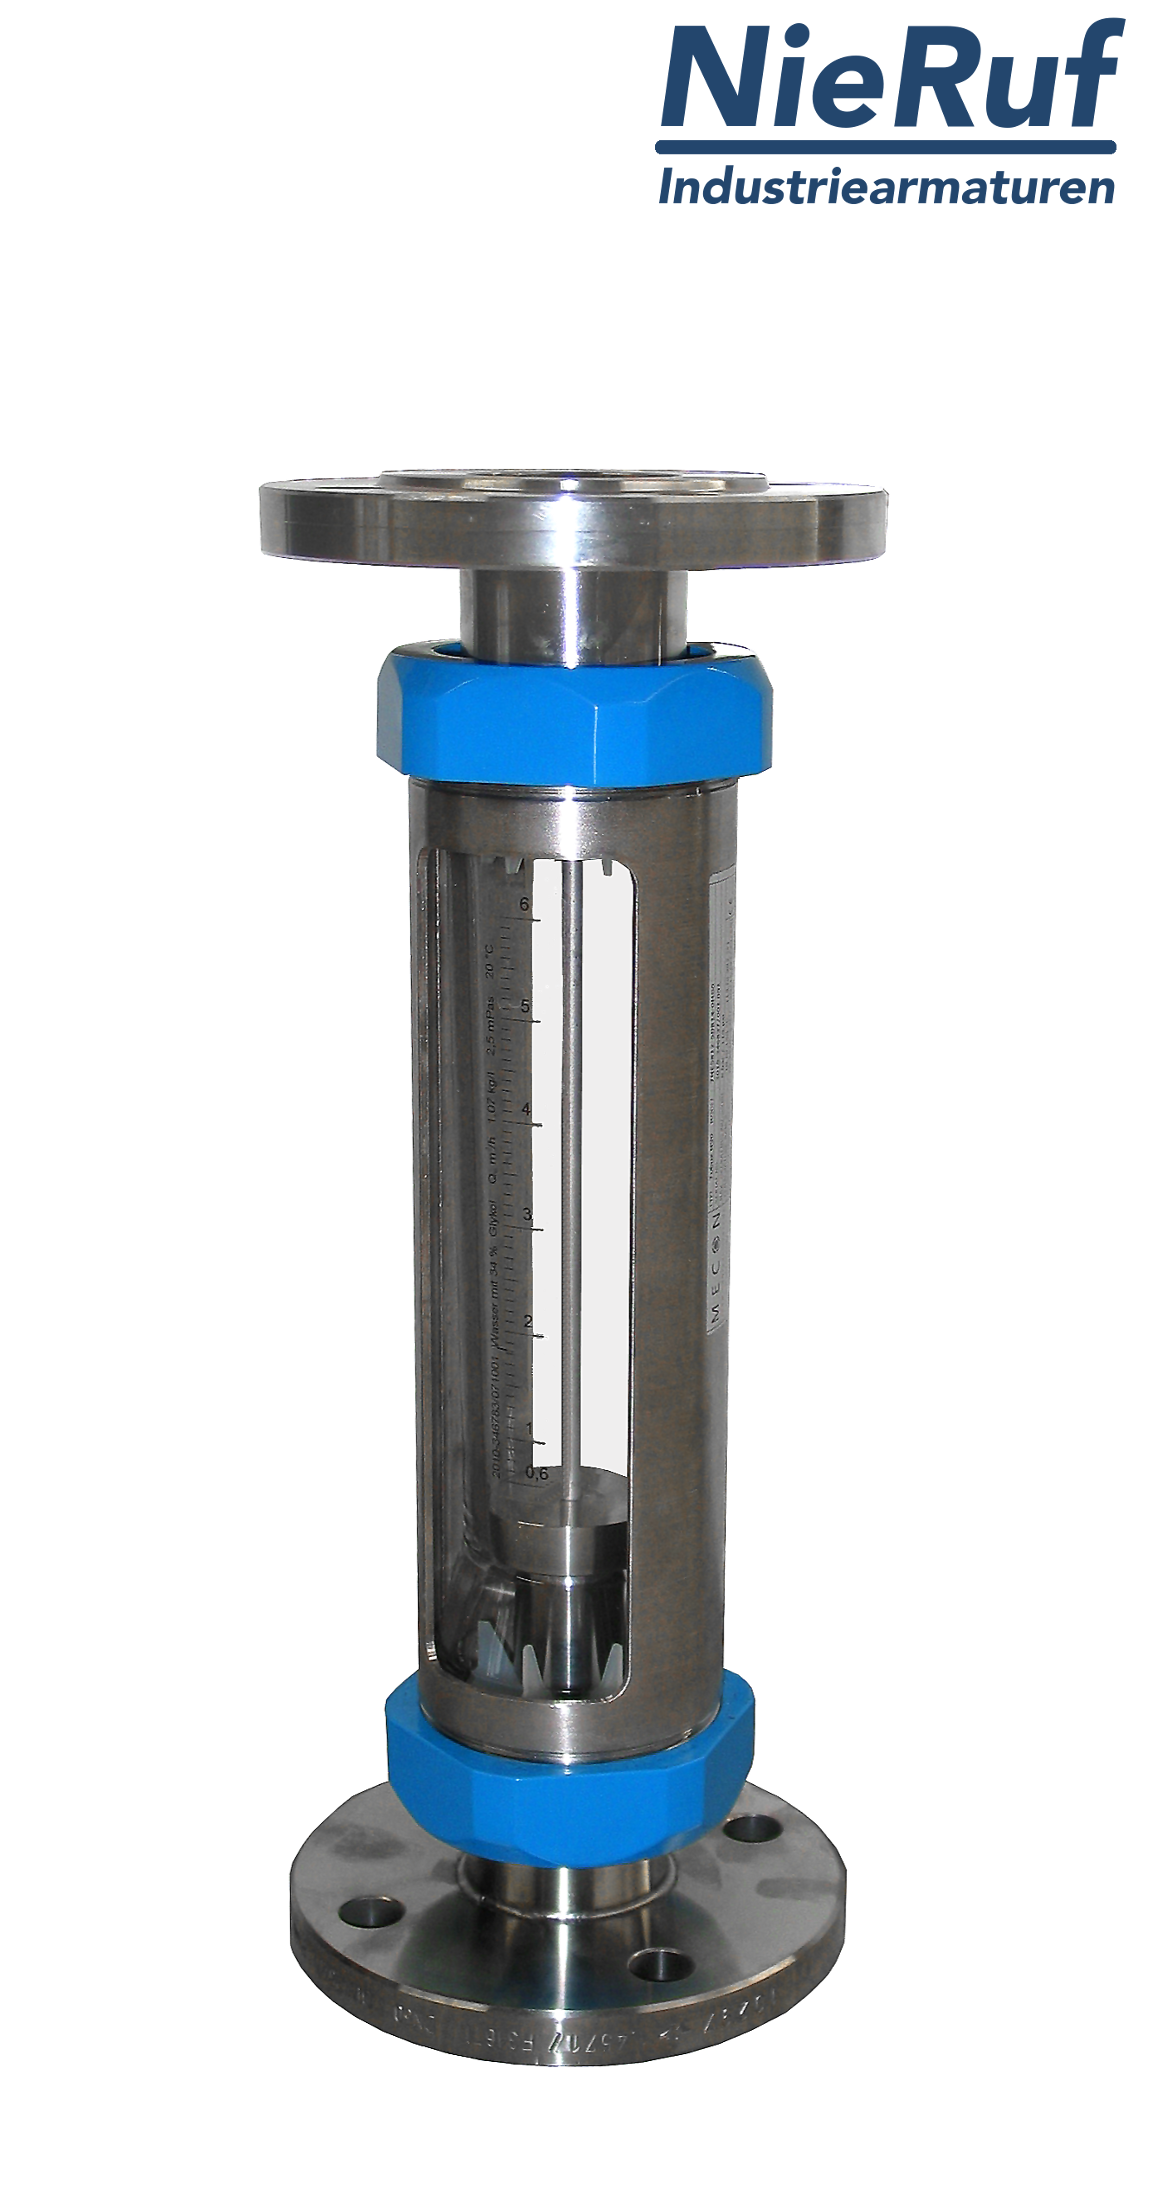 Variable area flowmeter stainless steel + borosilicate flange DN80 500.0 - 5000 l/h water FKM